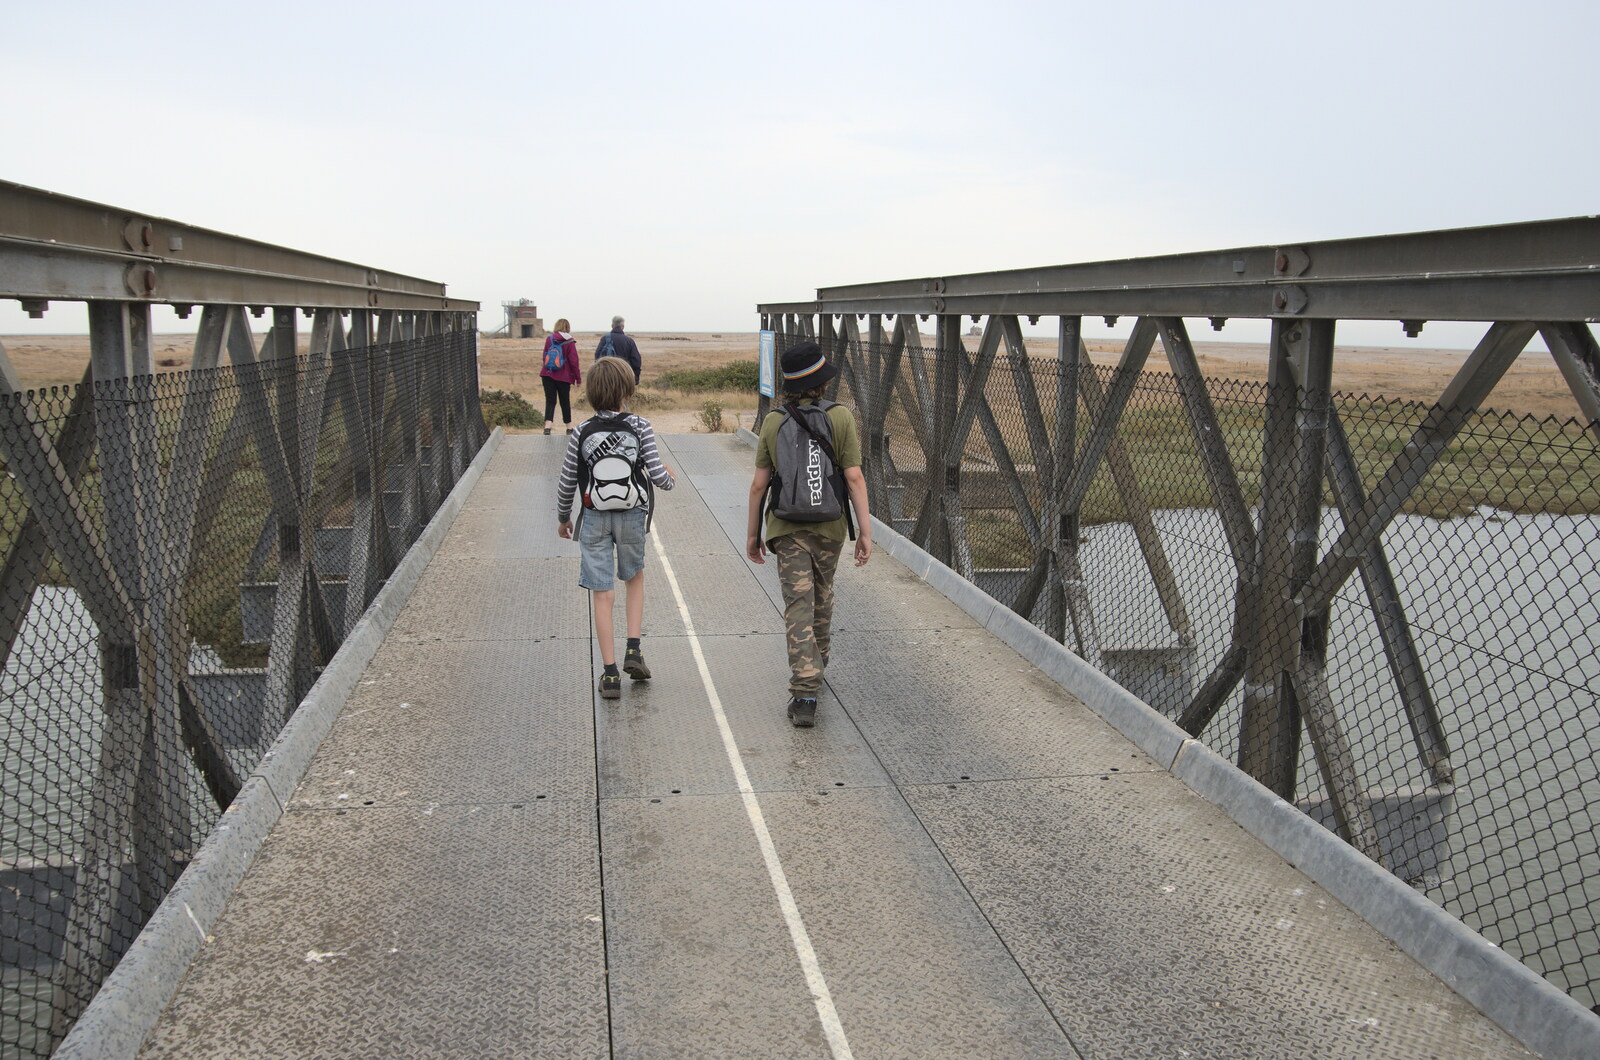 Harry and Fred on the Bailey bridge from A Trip to Orford Ness, Orford, Suffolk - 16th August 2022